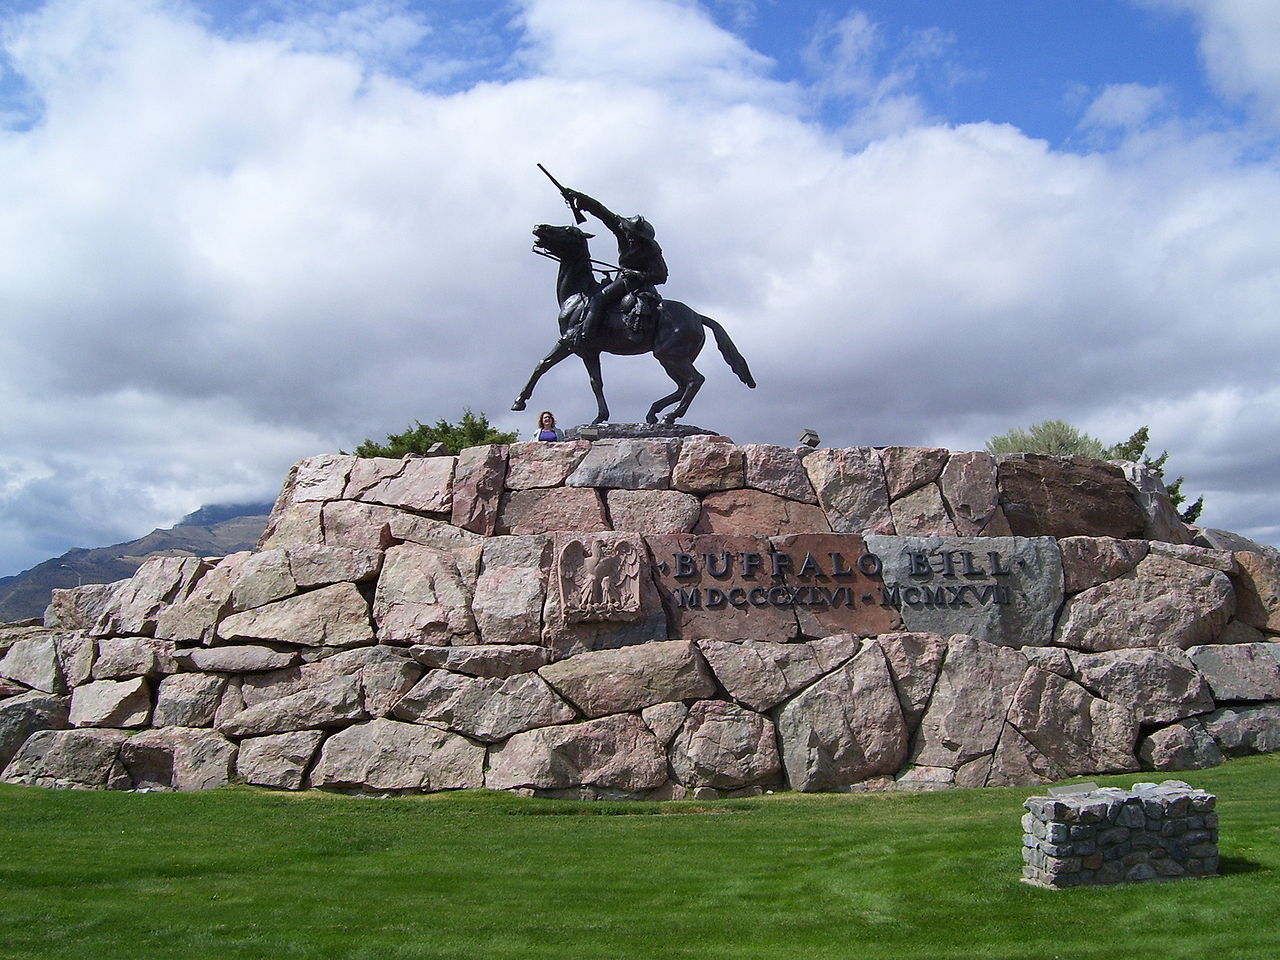 The Scout sculpture by Gertrude Vanderbilt Whitney in Cody, Wyoming